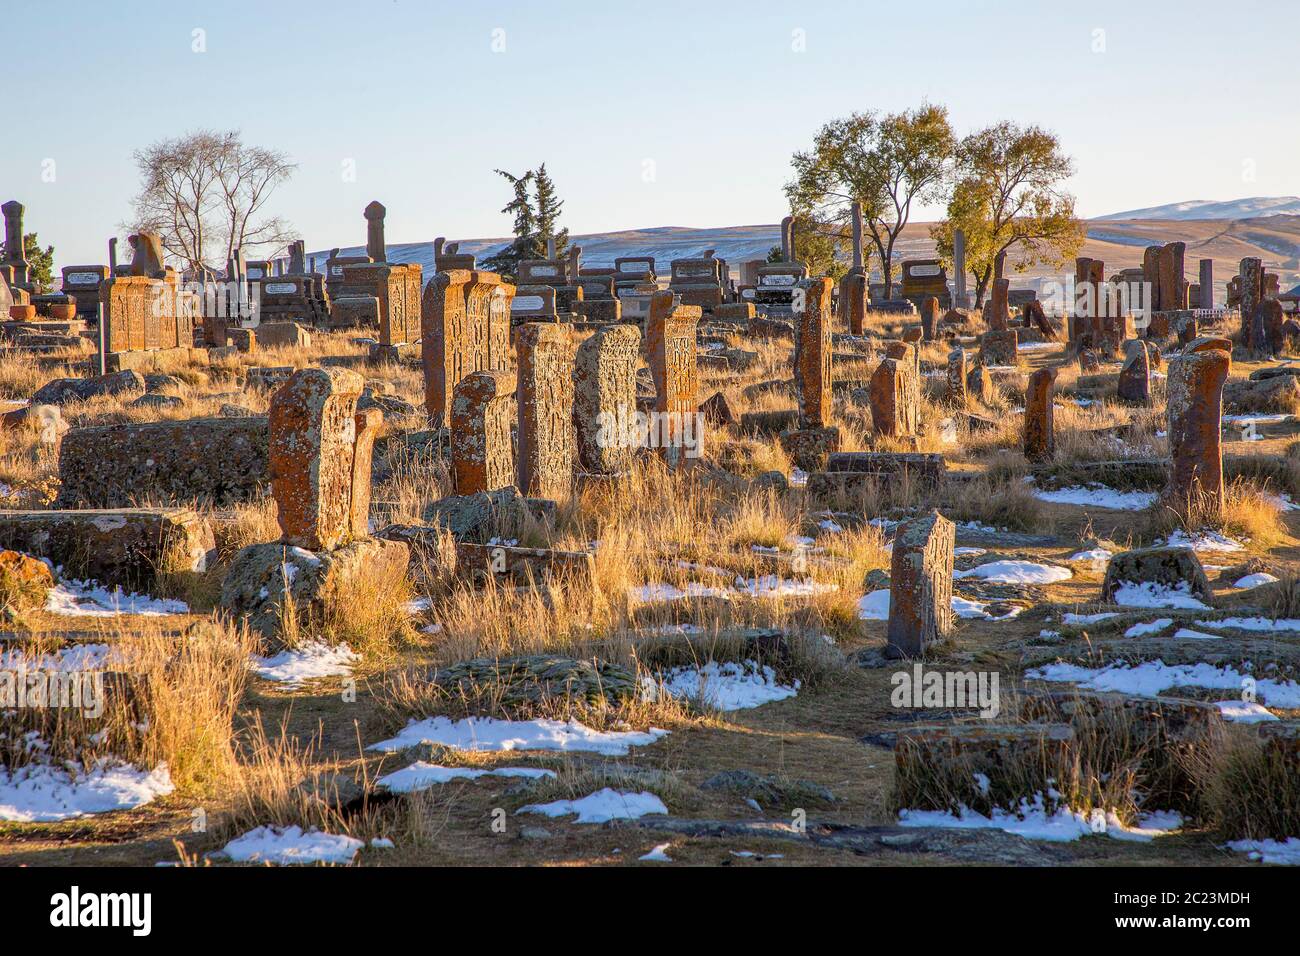 Historical tombs and headstones in the ancient cemetery of Noratus in Armenia Stock Photo